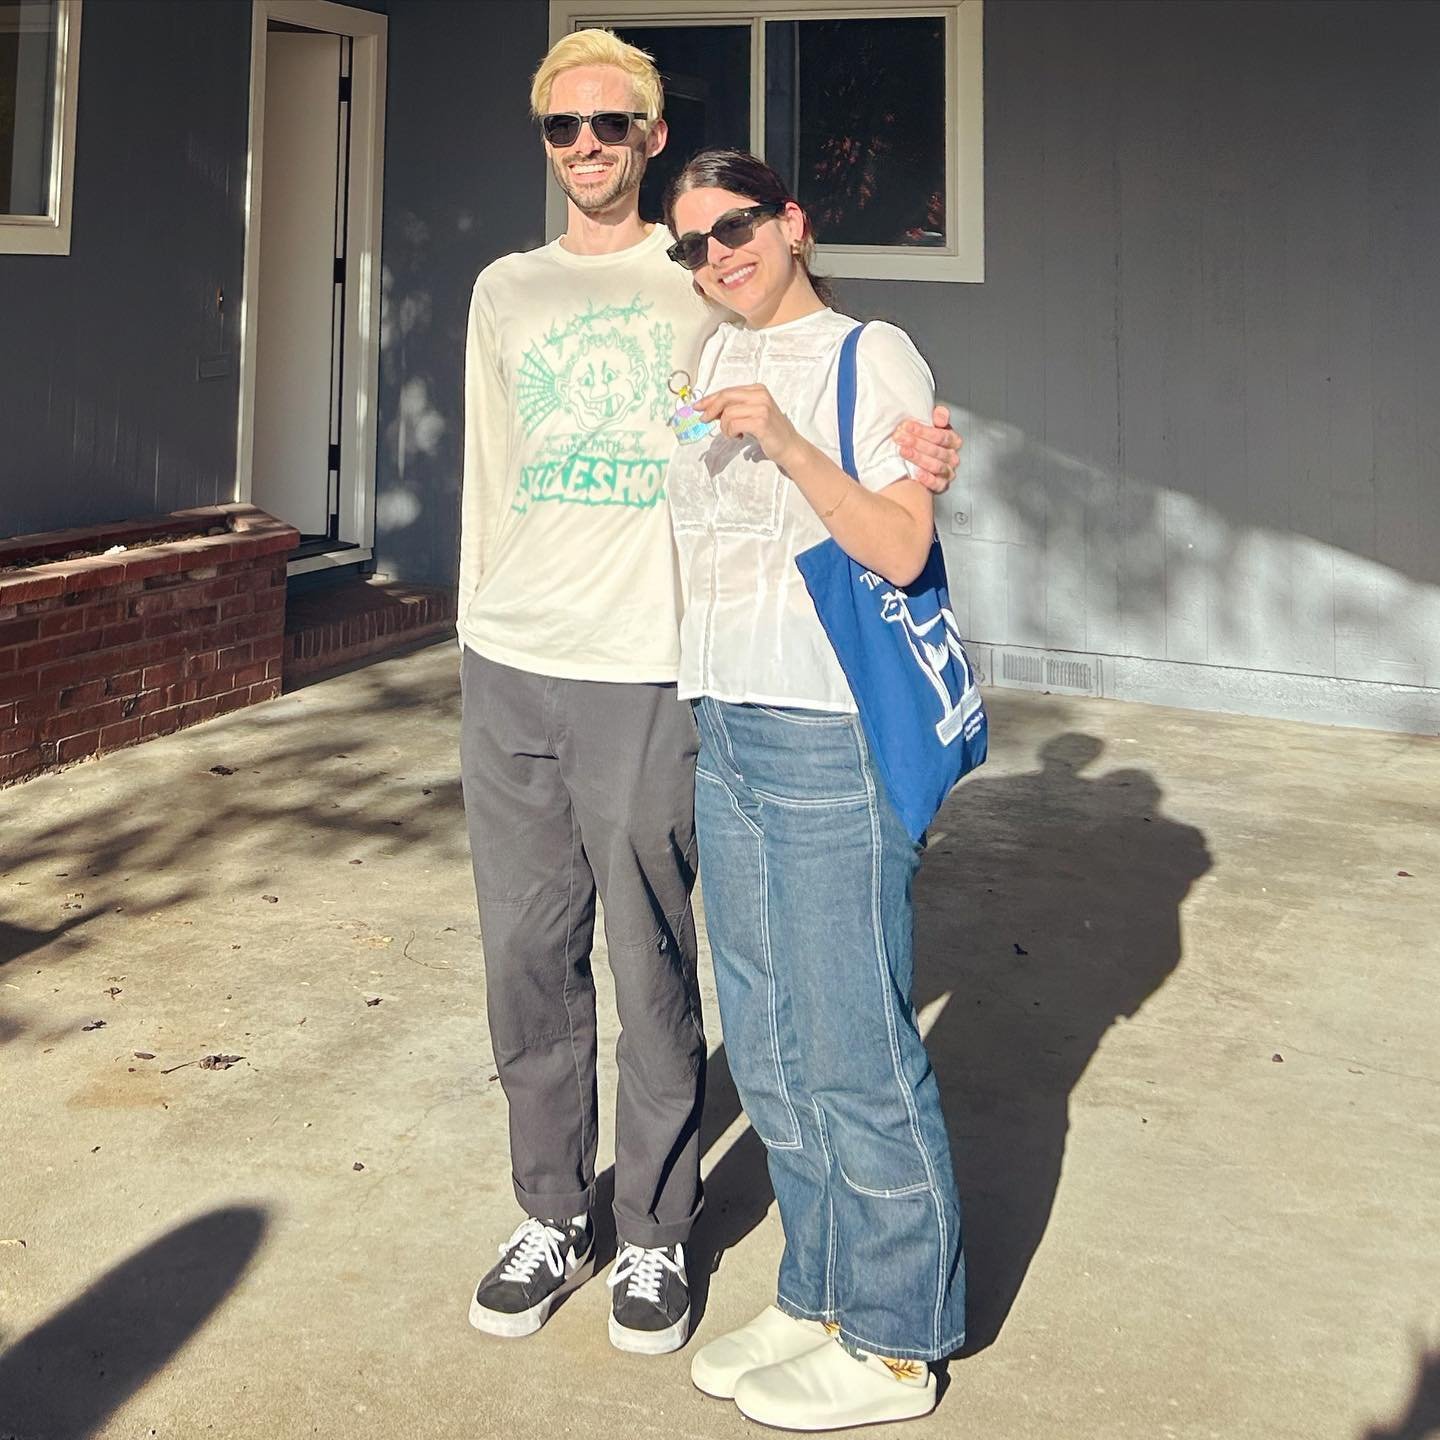 🔑 BRAND NEW KEYS for Emma &amp; Tim ✨
.
The search for the &ldquo;perfect&rdquo; Mid-Century that was close-in and had a good layout was a search that spanned many months and had two heartbreaks along the way. We got to the closing on this cutie aft